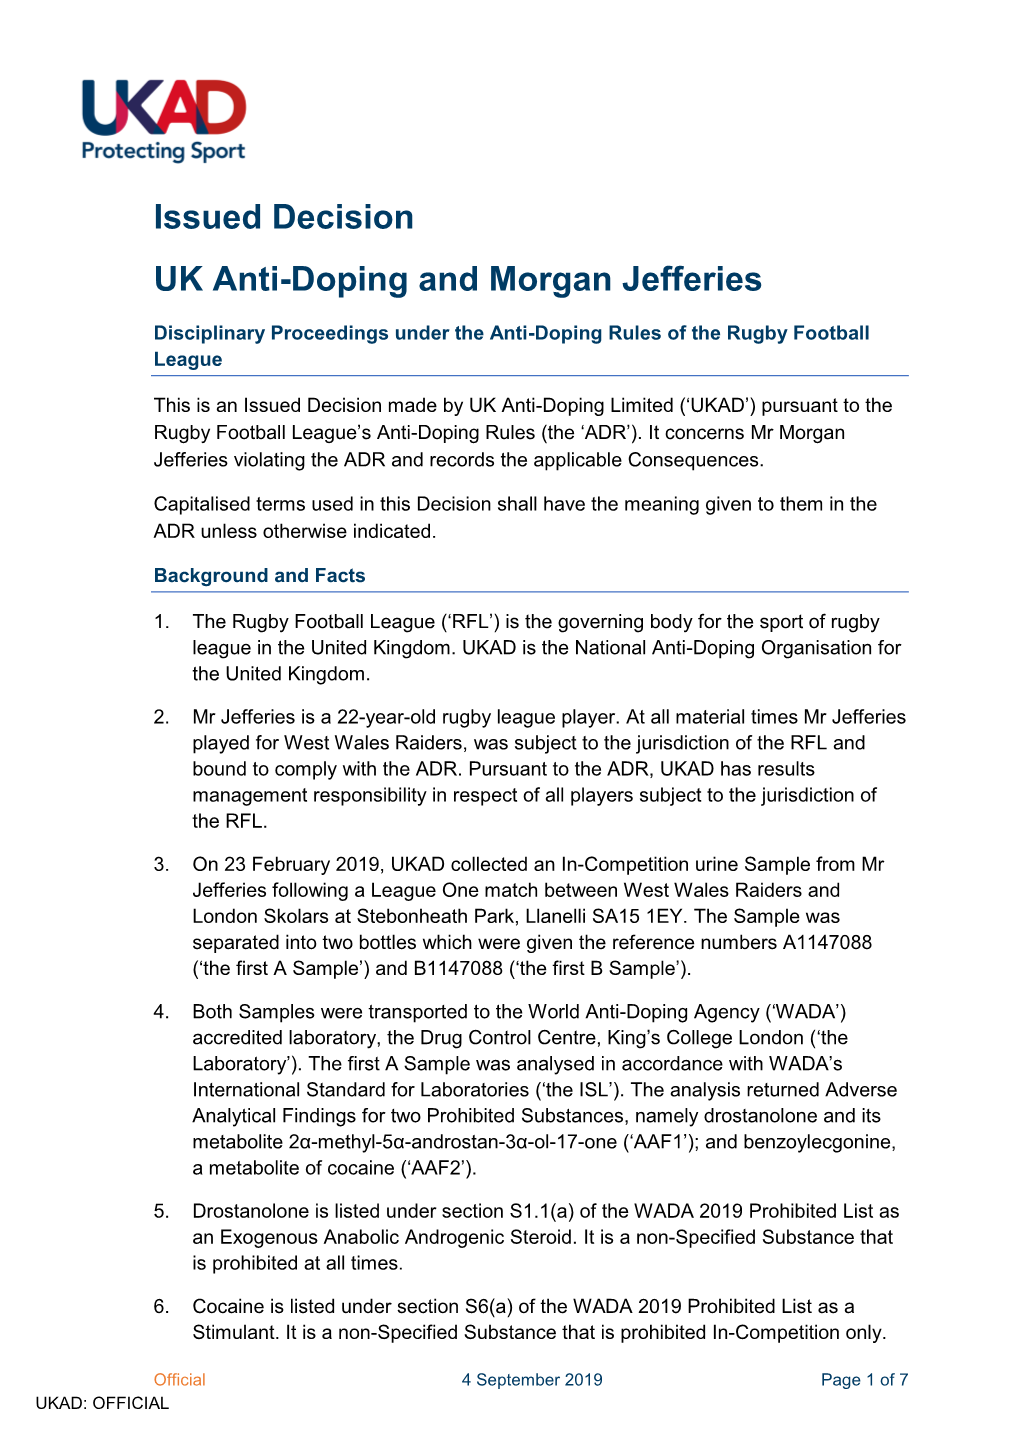 Issued Decision UK Anti-Doping and Morgan Jefferies